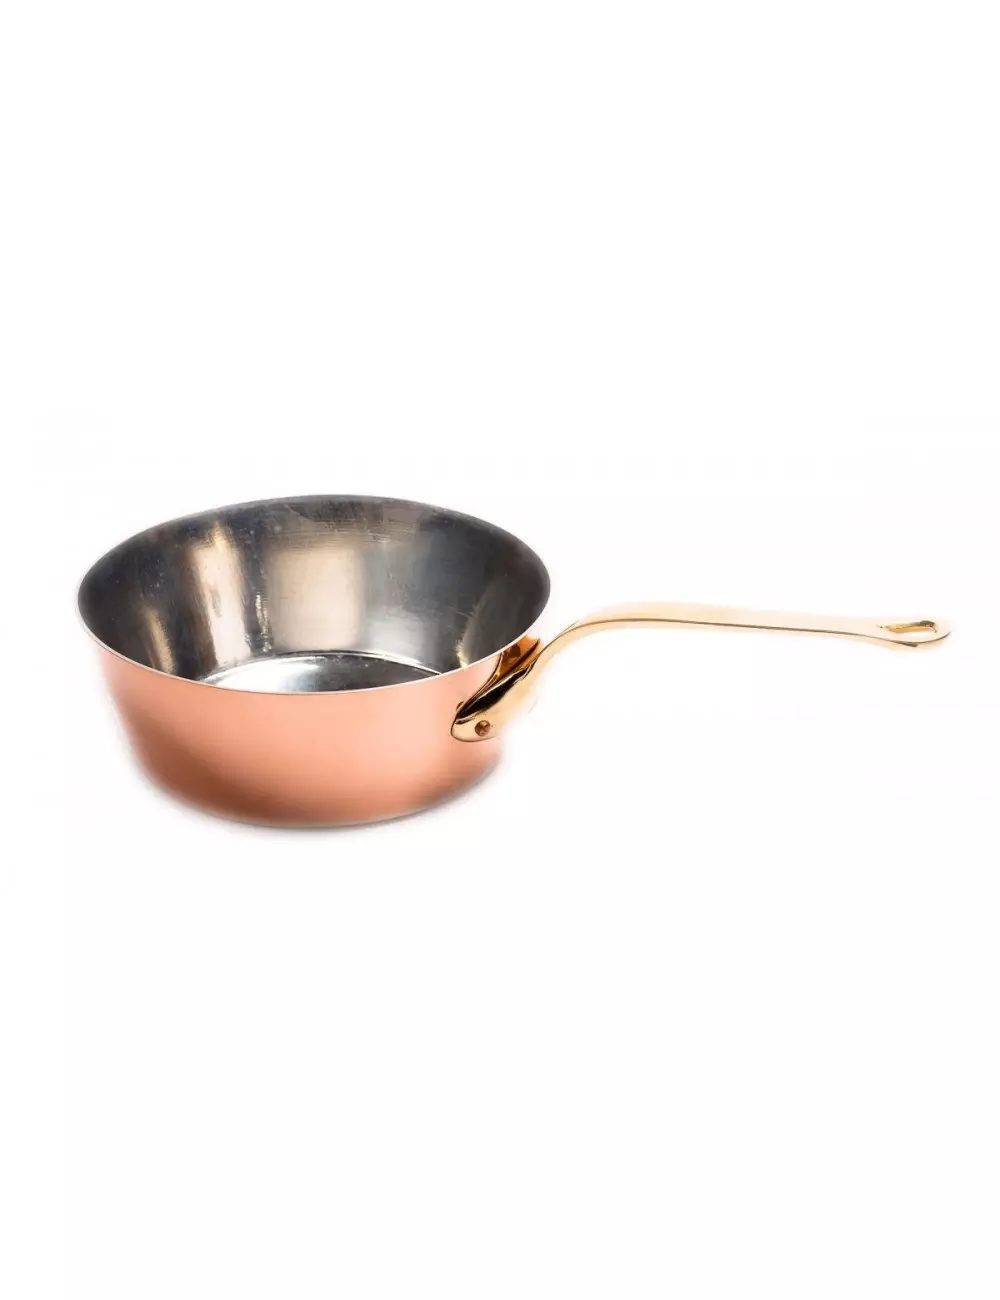 SPLAYED SAUTE PAN IN COPPER TIN EXTRA THICK WITH BRONZE HANDLE-COOKING  UTENSIL Choix diamètre (cm) 16